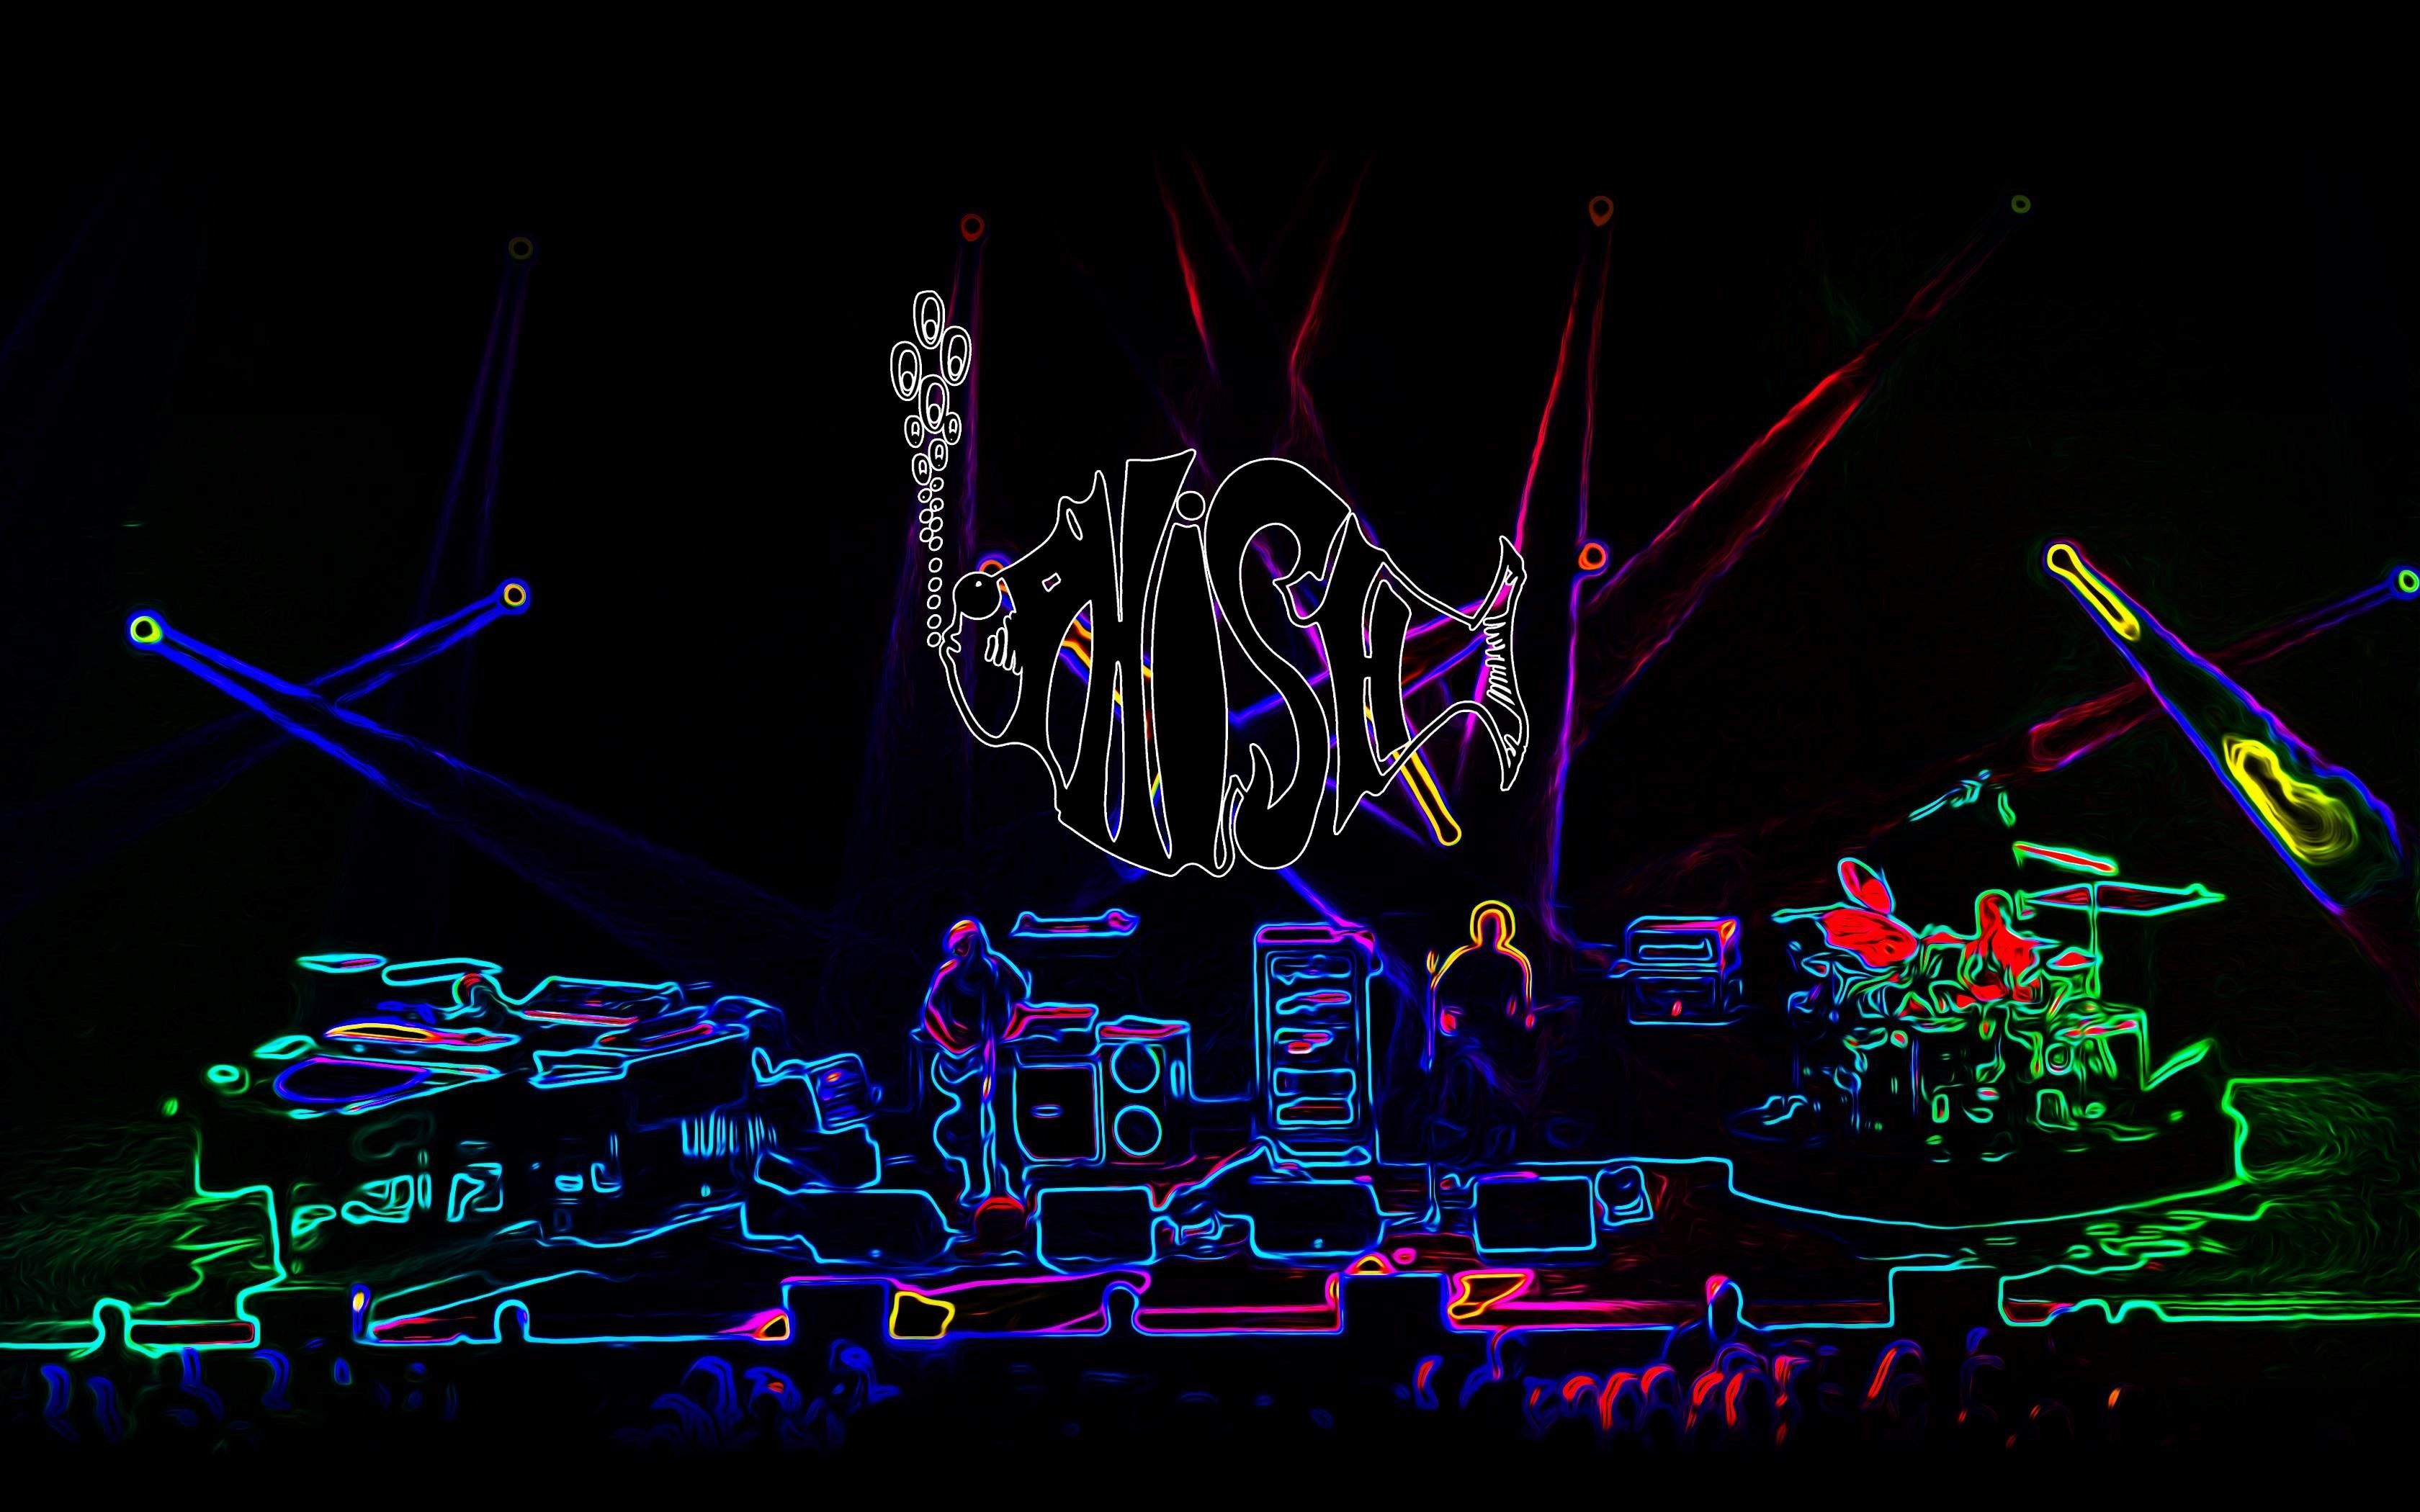 More Phish Backgrounds by request  rphish